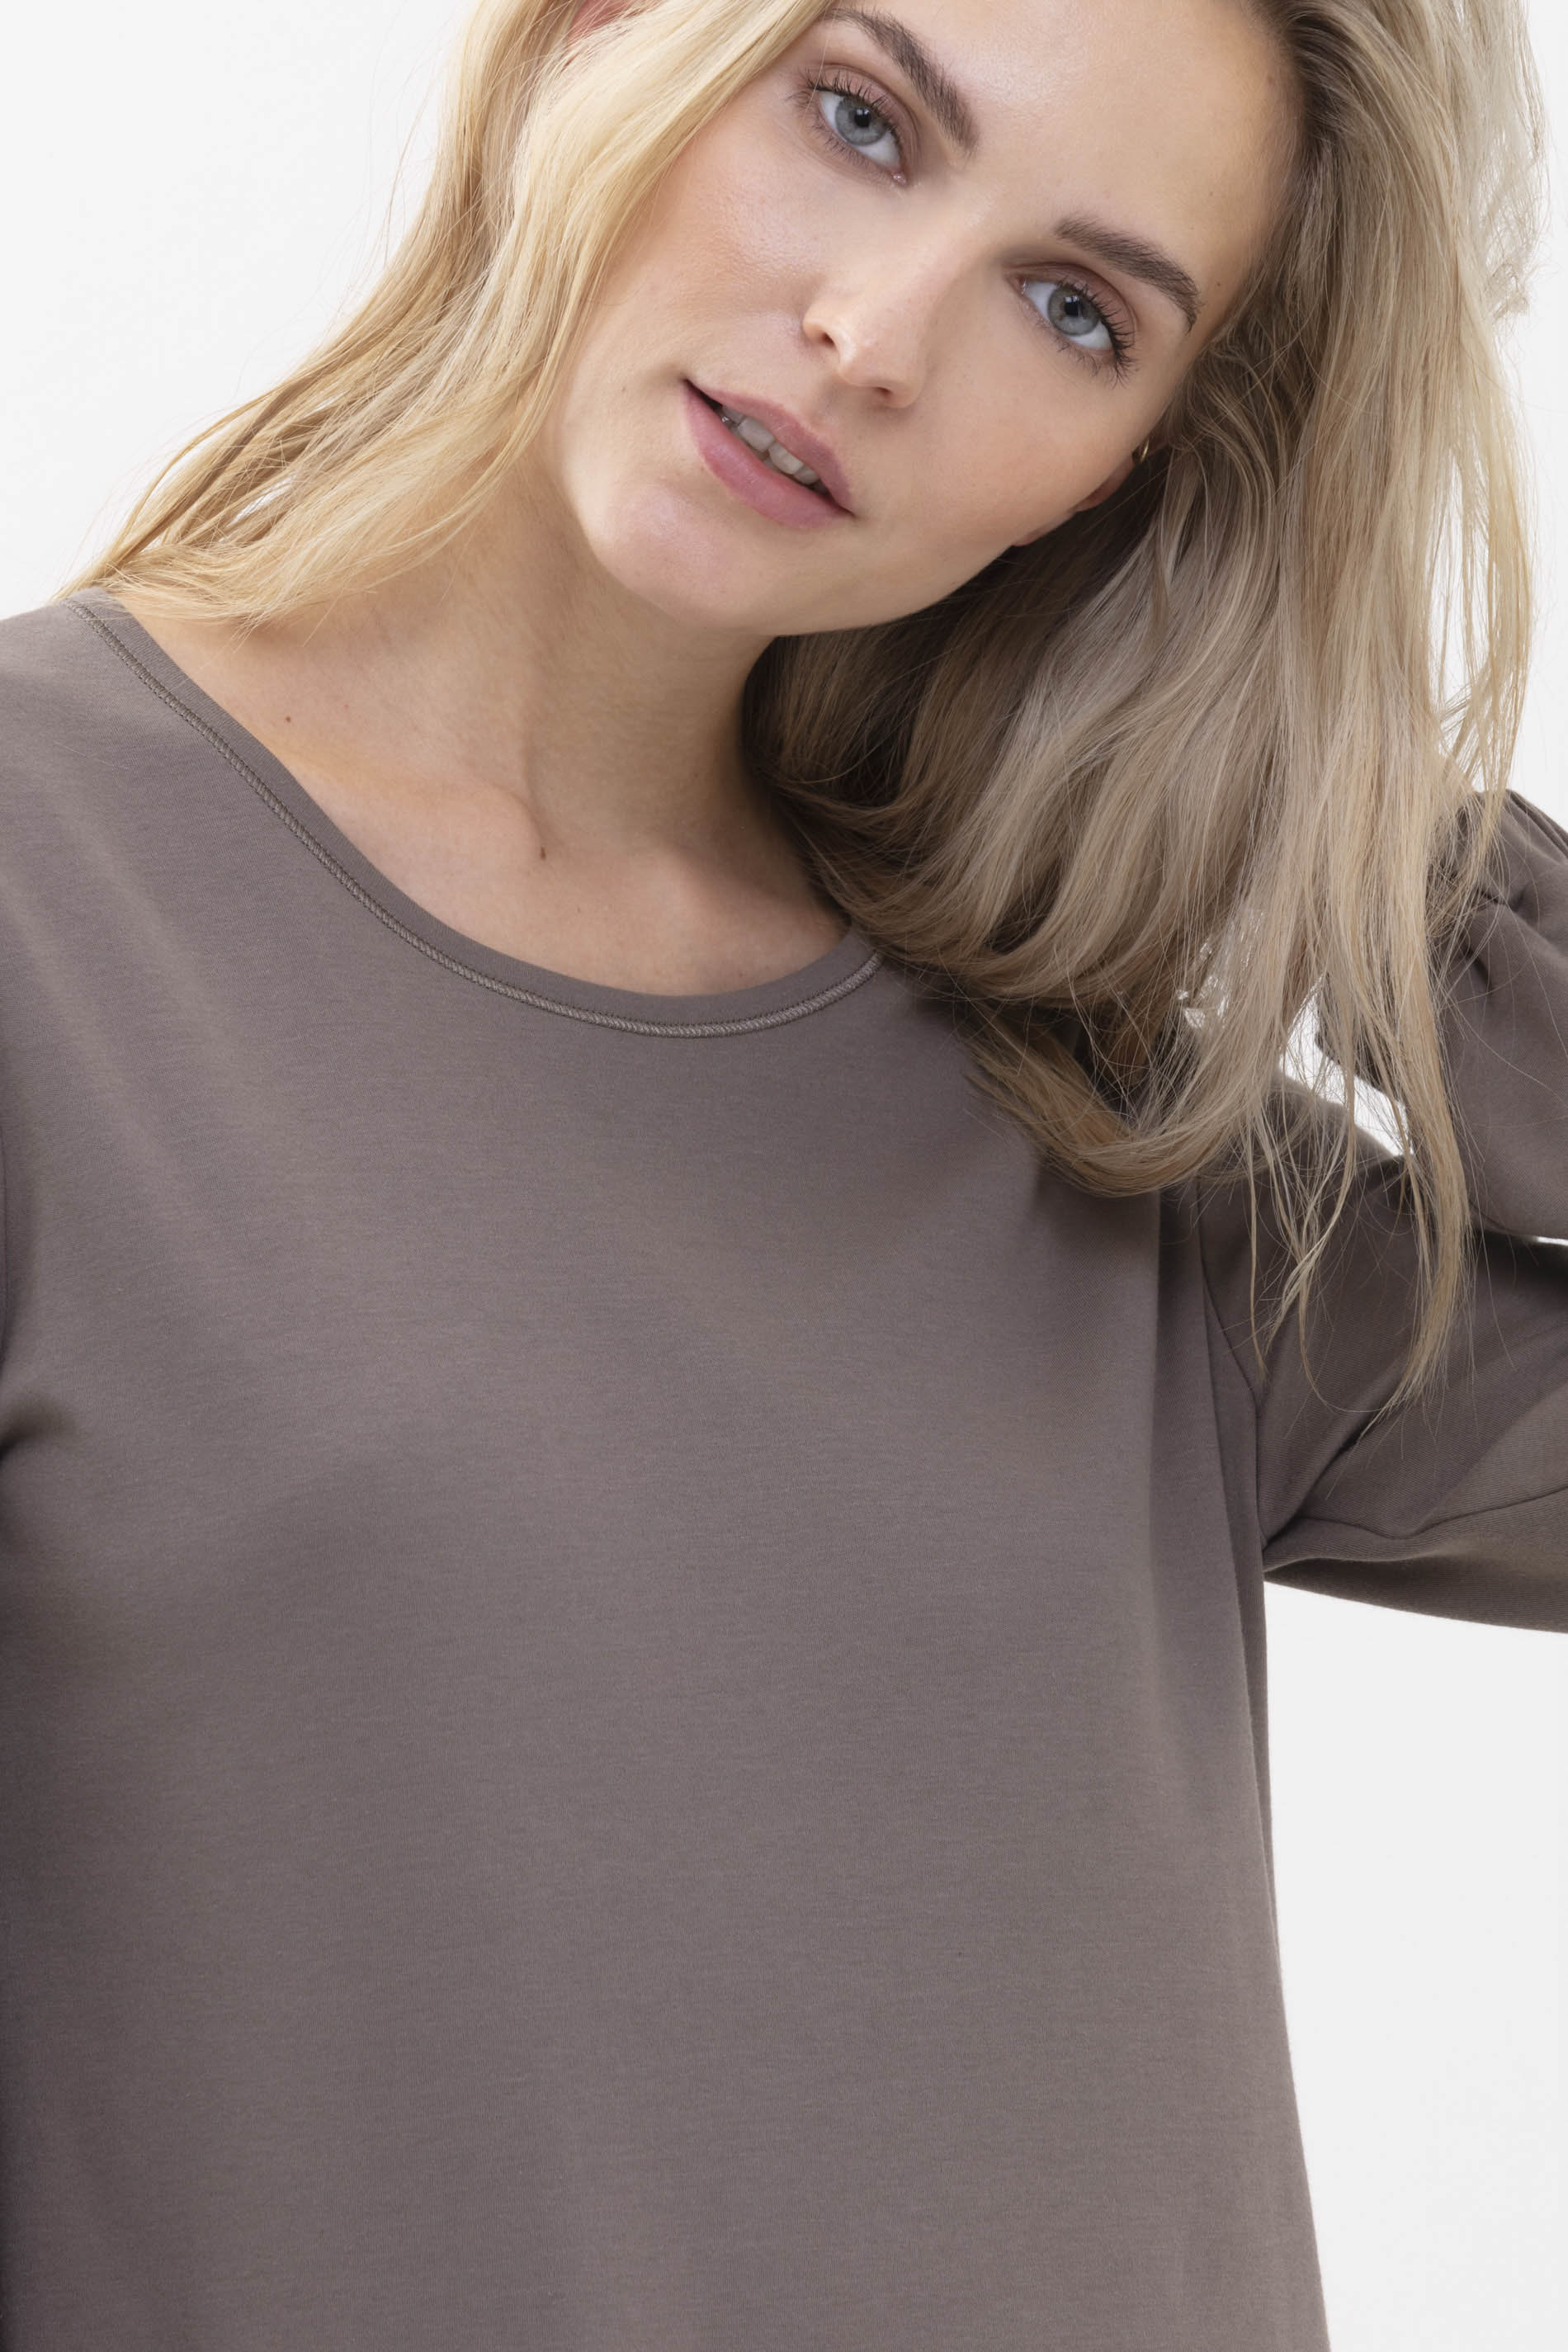 Nightshirt with full-length sleeves Deep Taupe Serie N8TEX 2.0 Detail View 01 | mey®